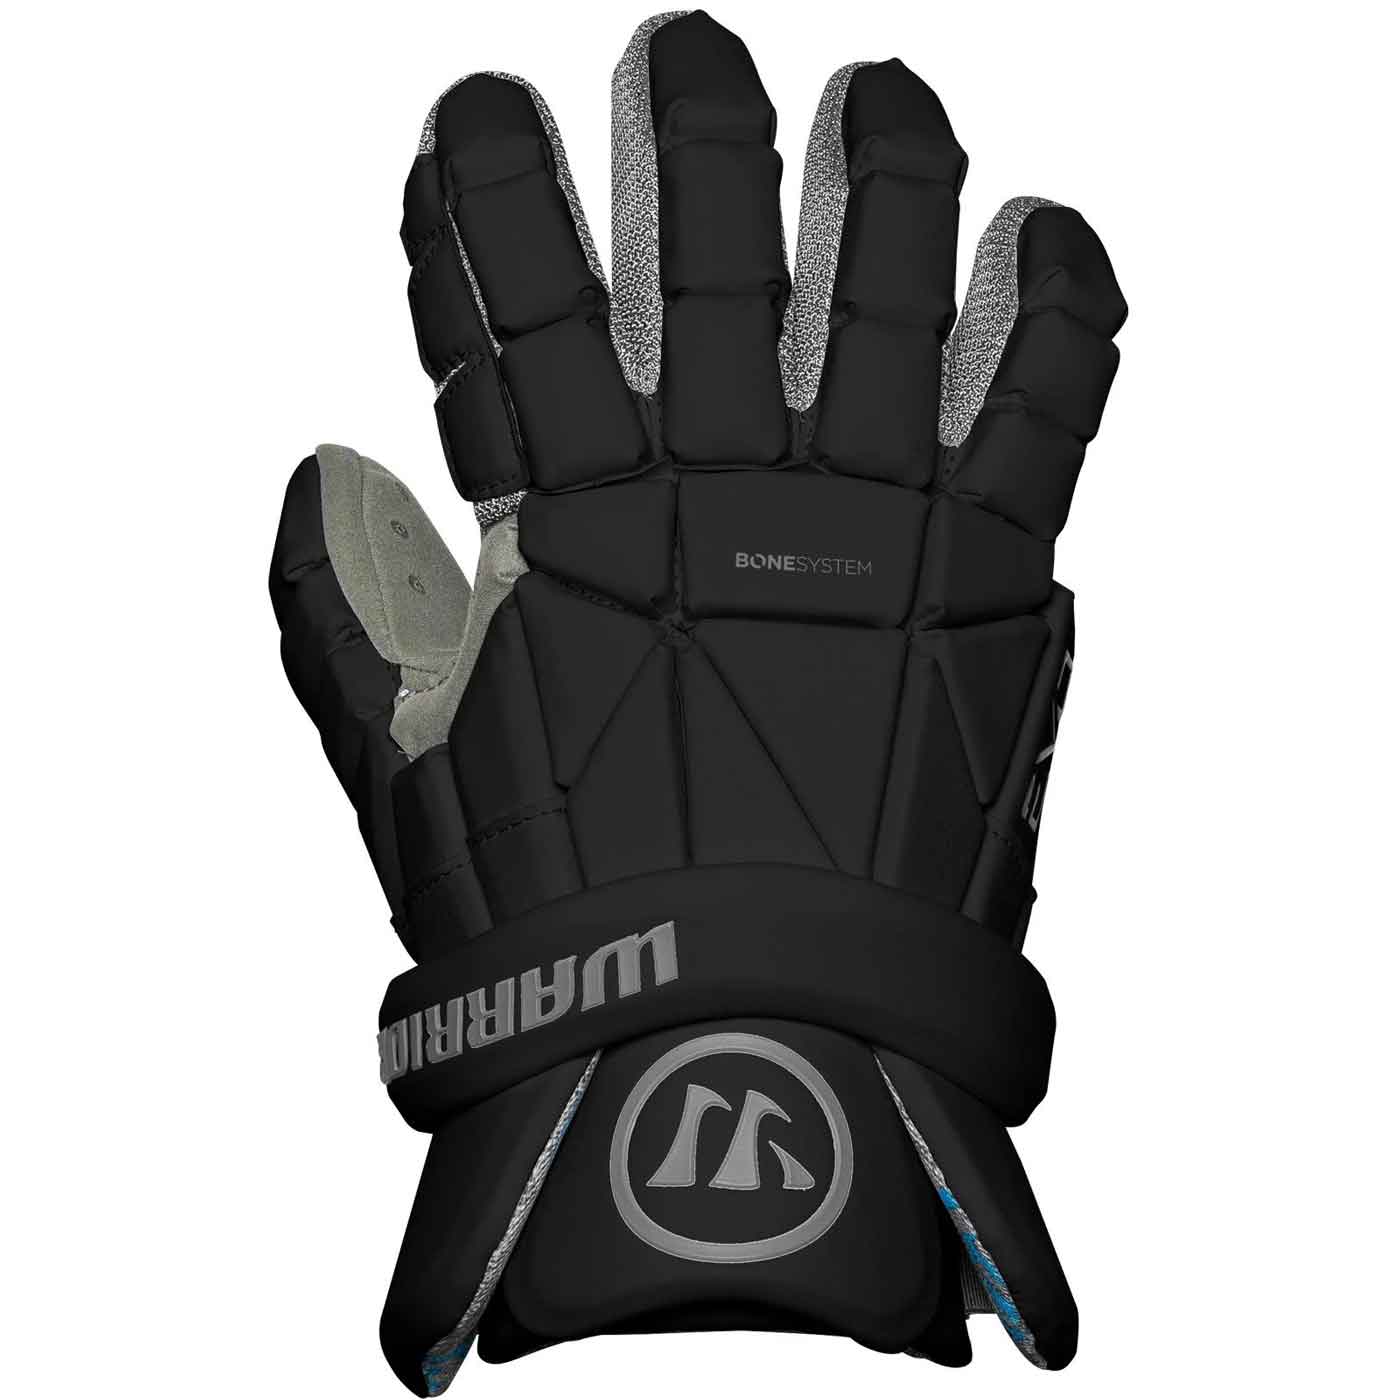 Picture of the black Warrior Evo Lacrosse Gloves